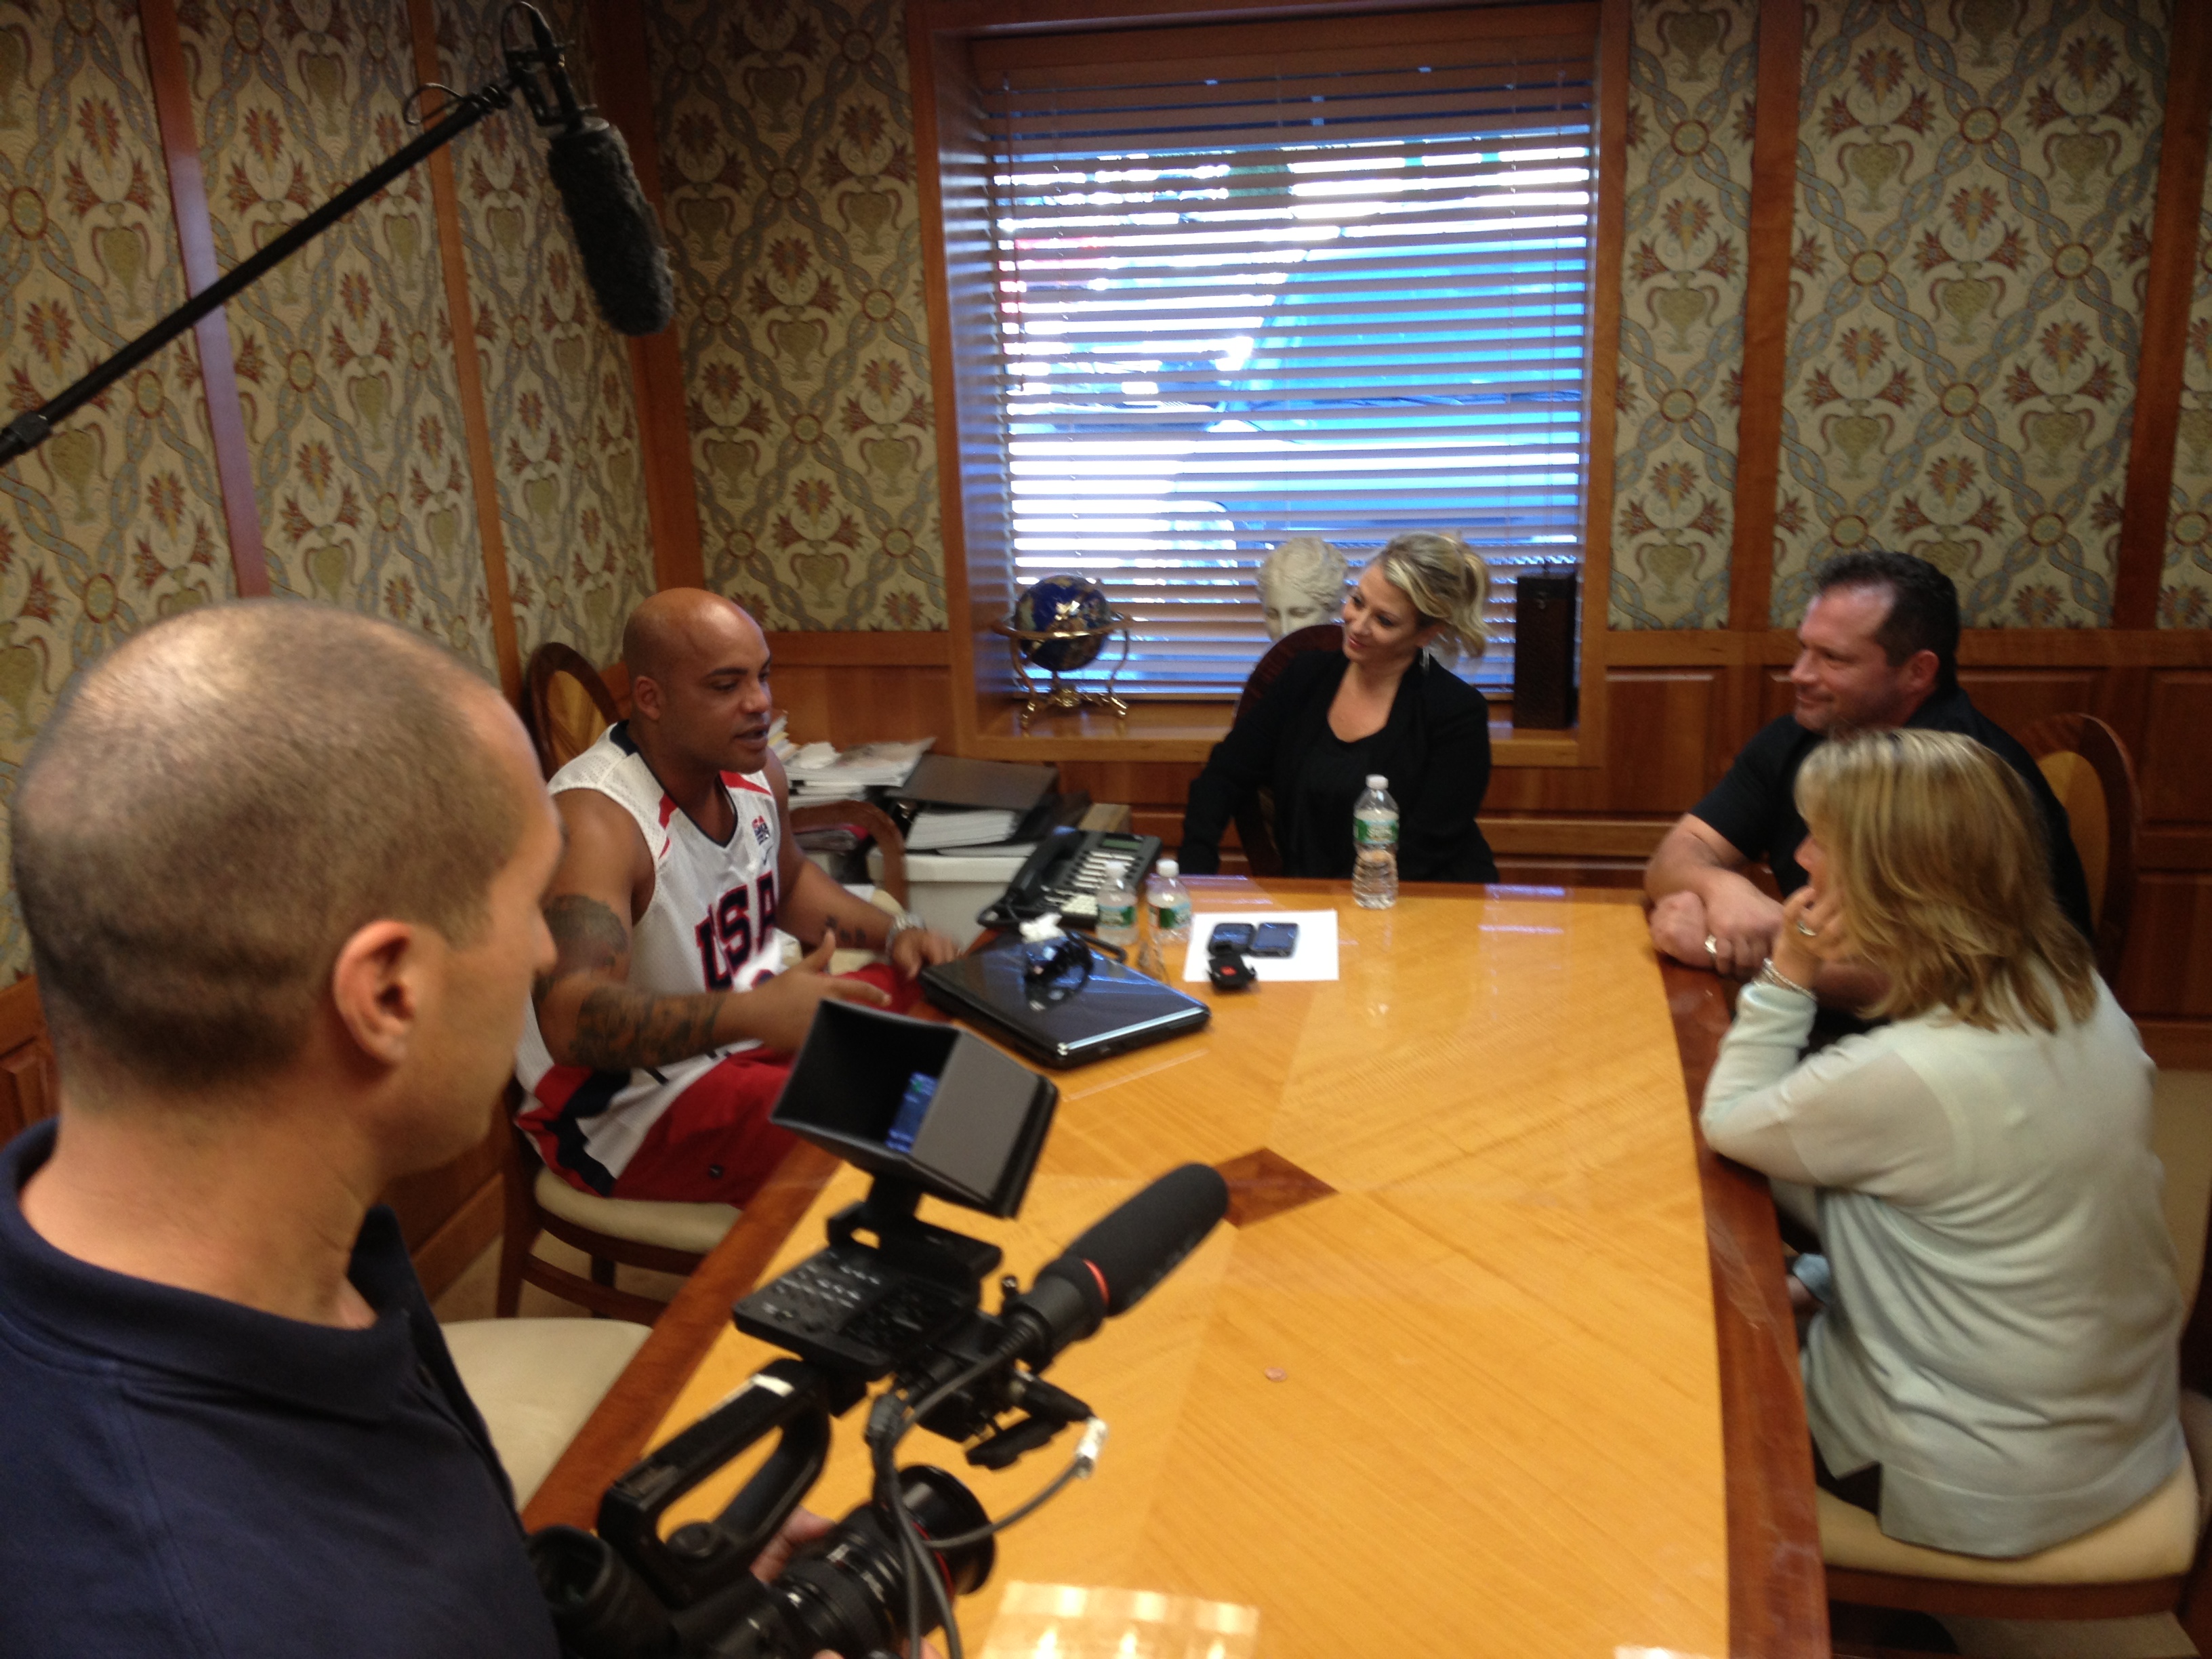 Ray Lucas, former NY Jets quarterback conducts a player peer group at P.A.S.T with case manager Jennifer Smith during filming of the GQ documentary series Casualties of the Gridiron.